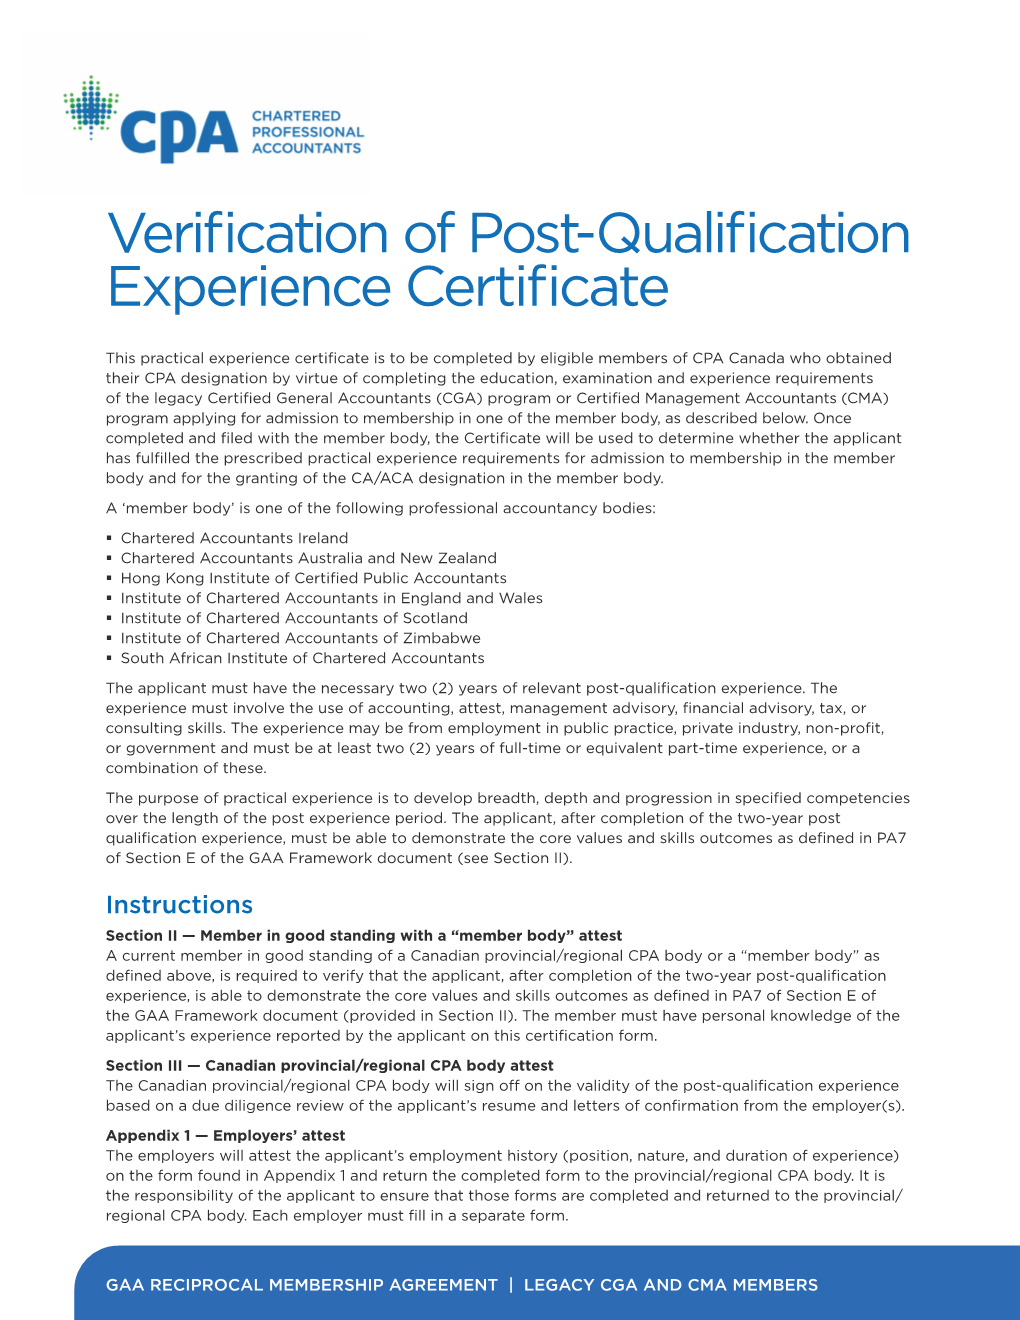 Verification of Post Qualification Experience Certificate